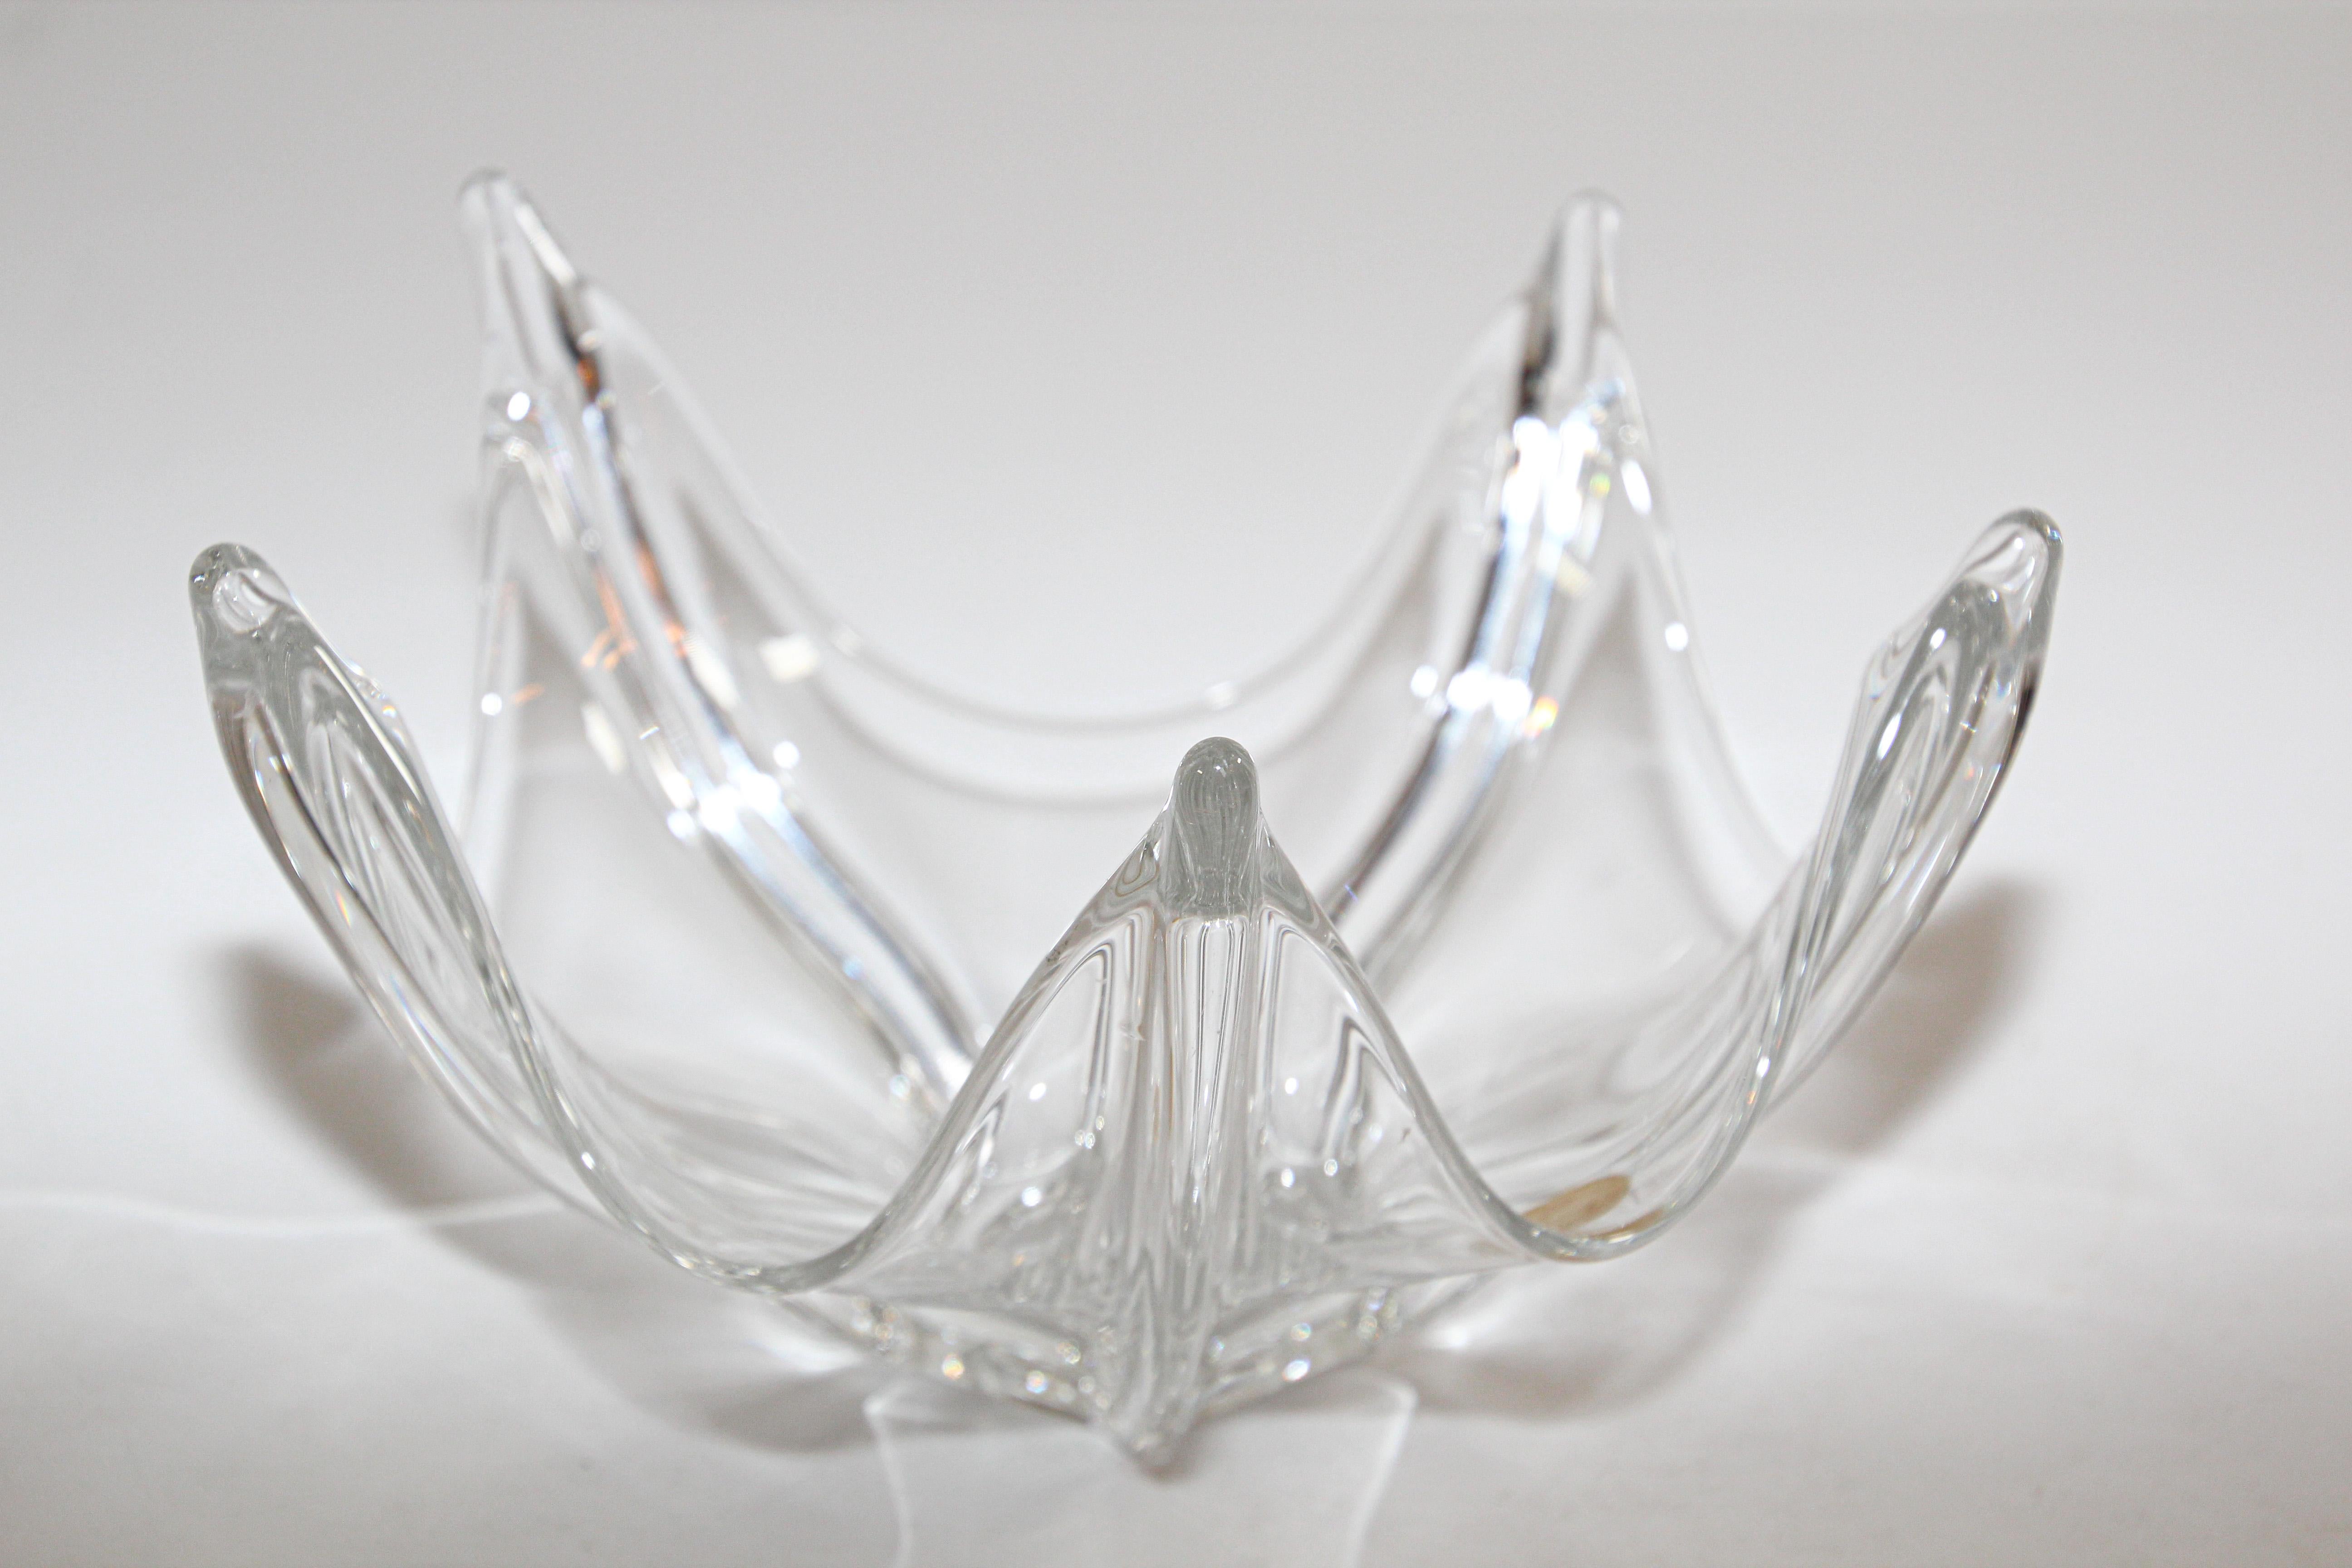 Free-blown clear crystal glass small bowl, spike rim freeform crystal.
Crystal bowl in a swirled rib design with five ribbed points.
Could be used as a vide poche or decorative shelf accessories.
Use it as a catchall, change tray or jewelry tray